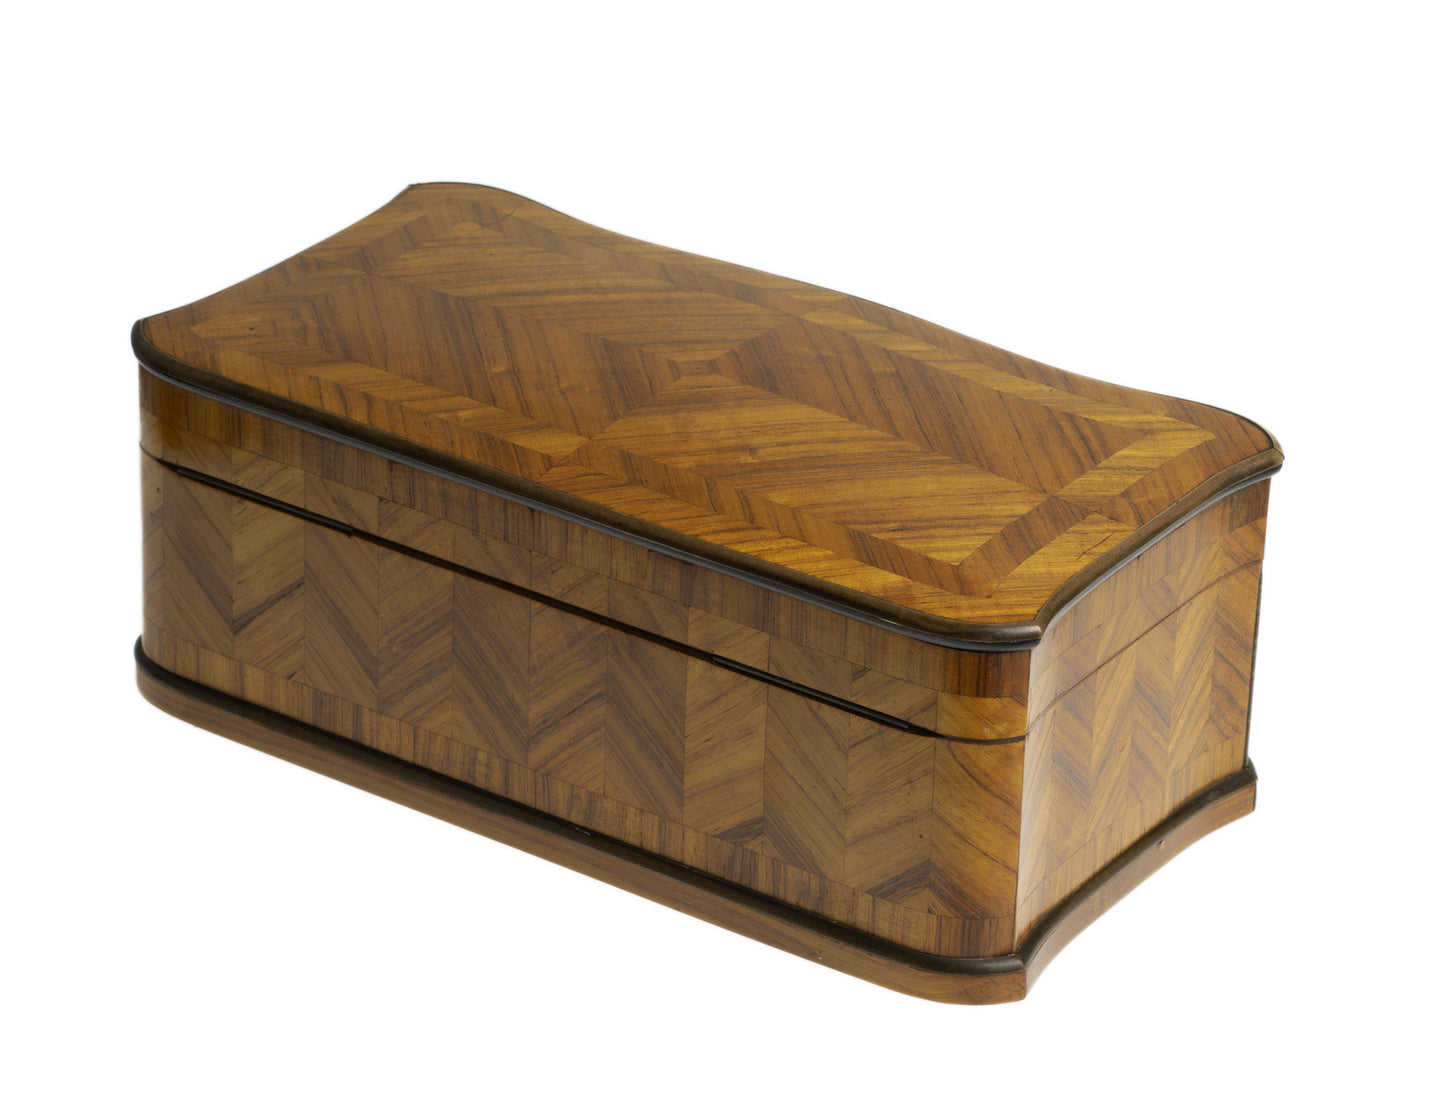 Antique French Kingwood Parquetry Table Box with Brass Bindings & Lock (Code 2681)